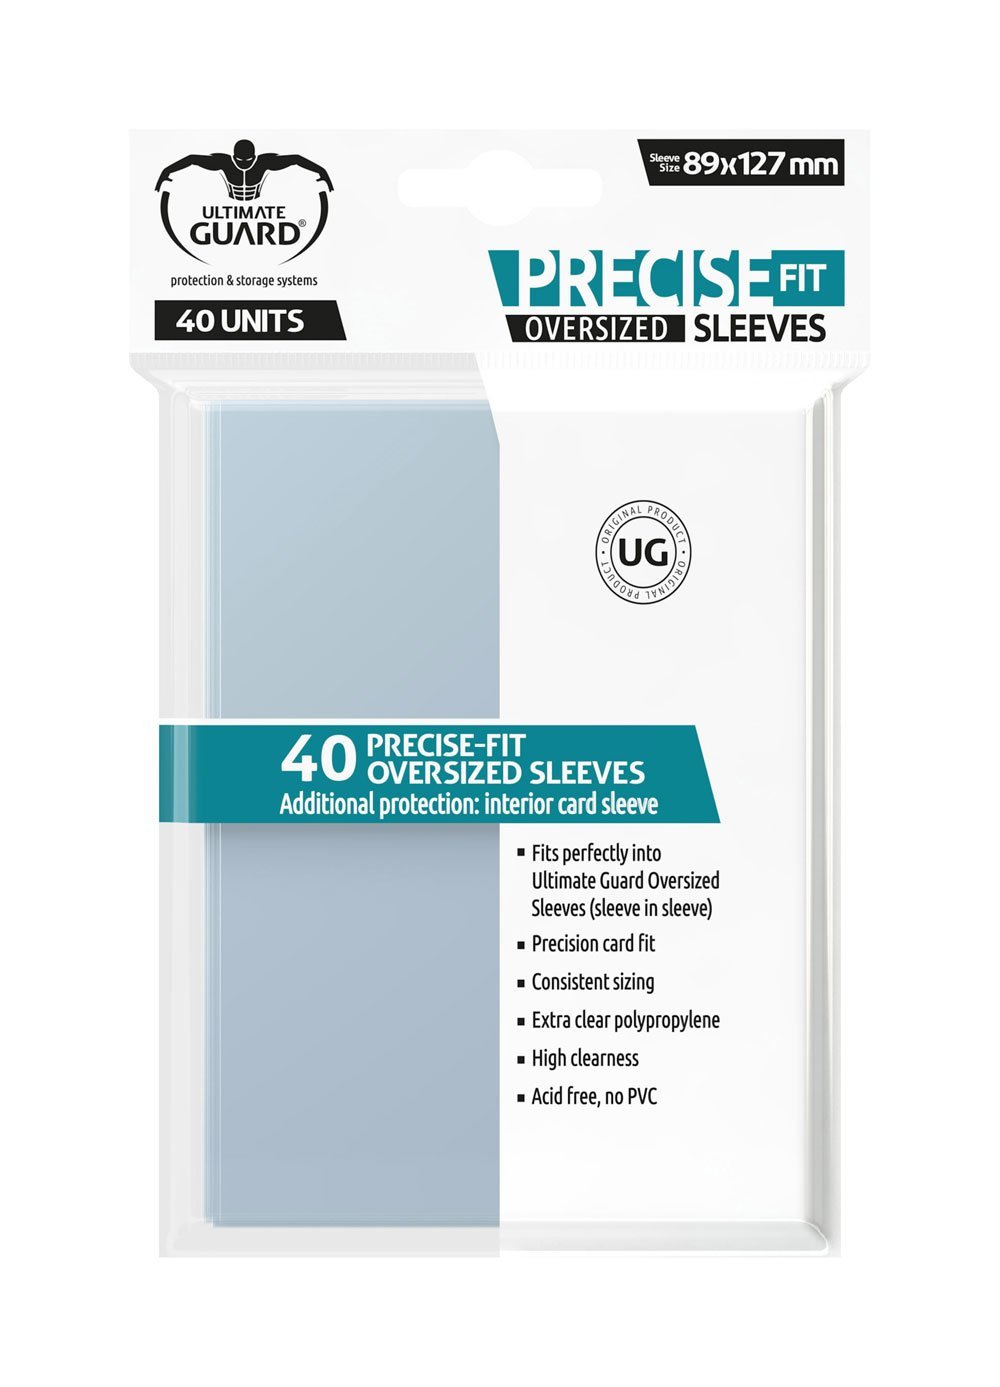 Magic Ultimate Guard 89x127mm Precise Fit Sleeves Oversized Transparent 